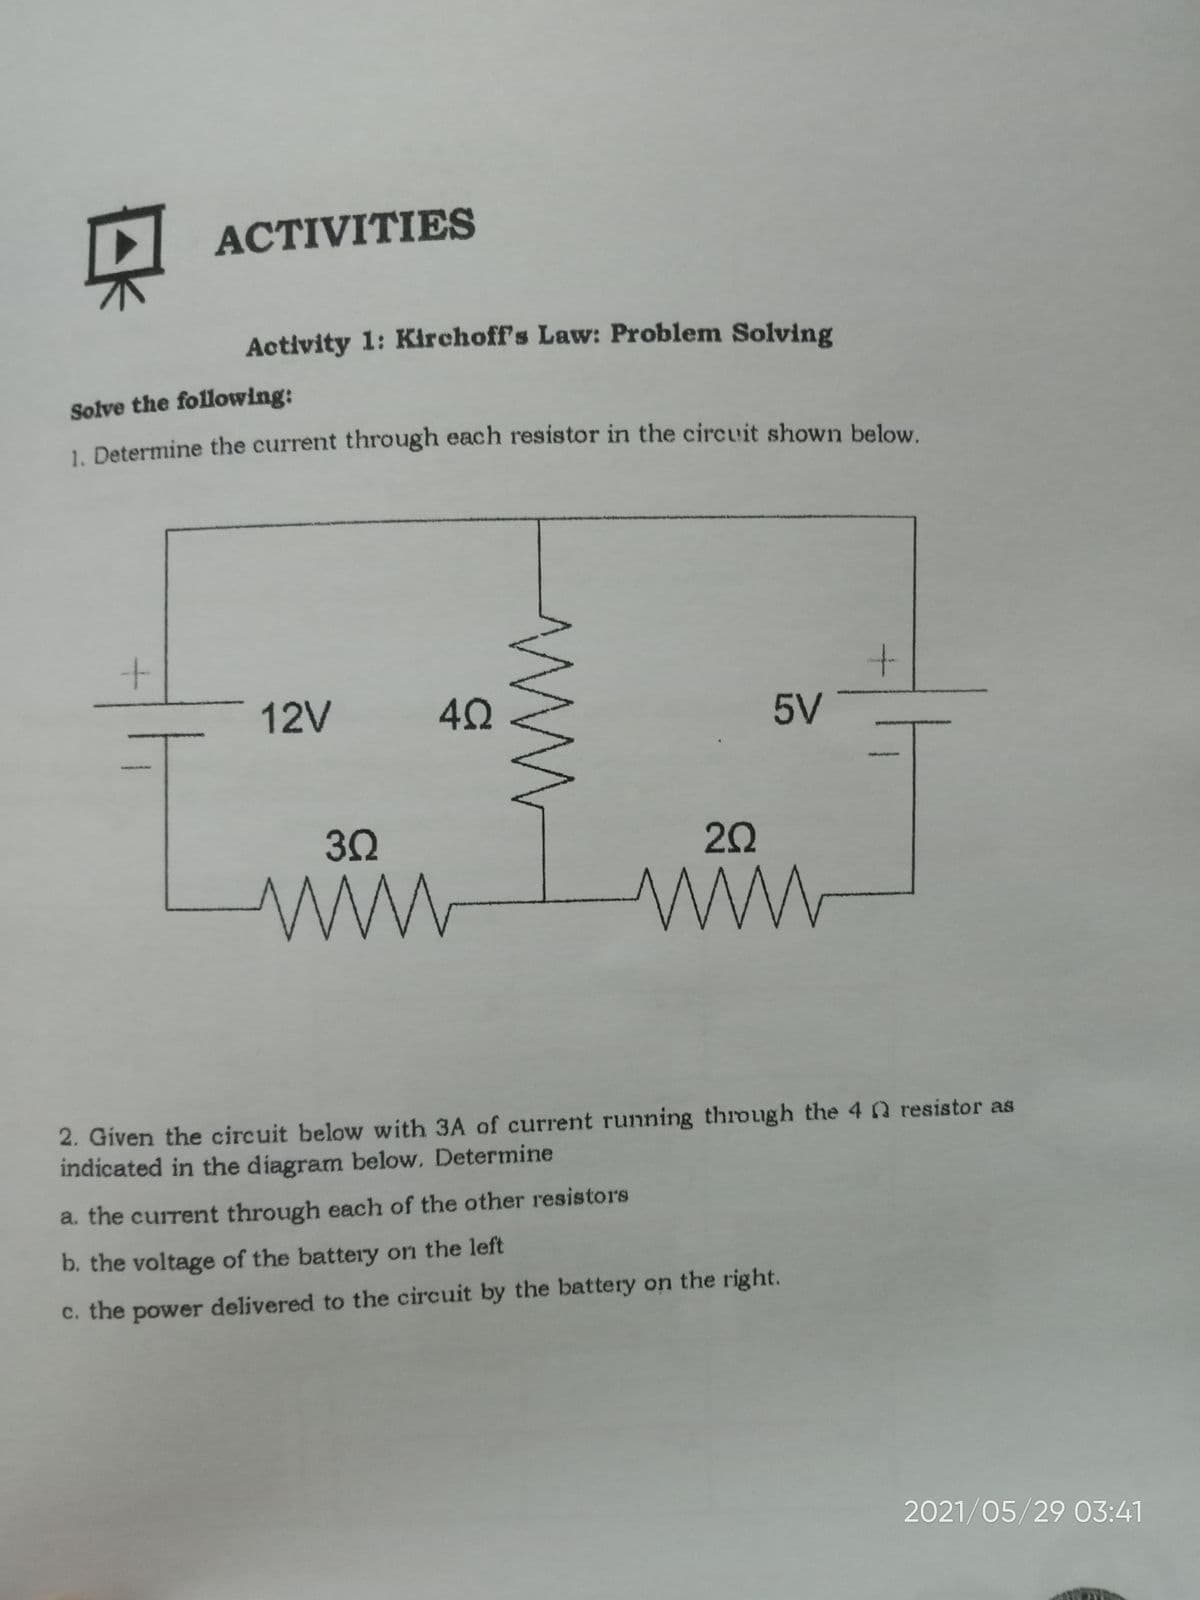 ACTIVITIES
Activity 1: Kirchoff's Law: Problem Solving
Solve the following:
1 Determine the current through each resistor in the circuit shown below.
12V
5V
3Ω
20
ww
ww
2. Given the circuit below with 3A of current running through the 40 resistor as
indicated in the diagram below. Determine
a. the current through each of the other resistors
b. the voltage of the battery on the left
c. the power delivered to the circuit by the battery on the right.
2021/05/29 03:41
